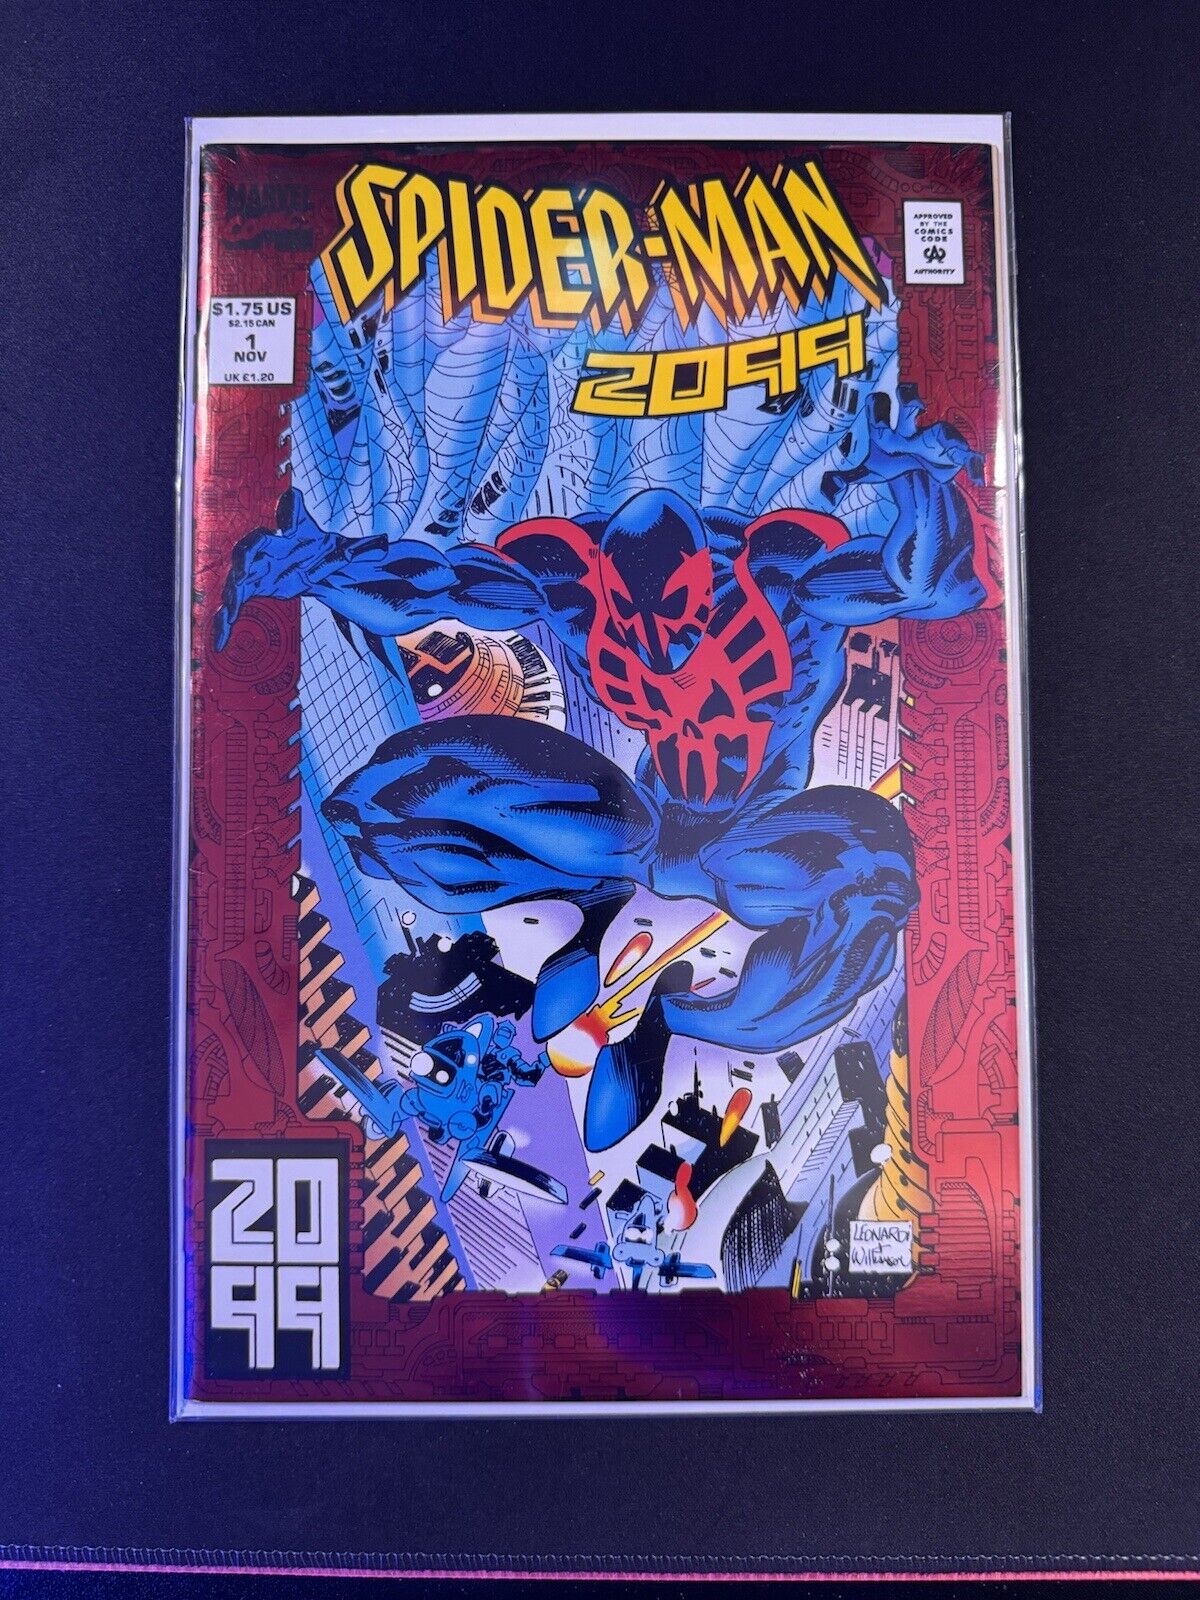 🔥🕸️ SPIDER-MAN 2099 #1  FOIL 1ST APPEARANCE AND ORIGIN OF SPIDER-MAN 2099